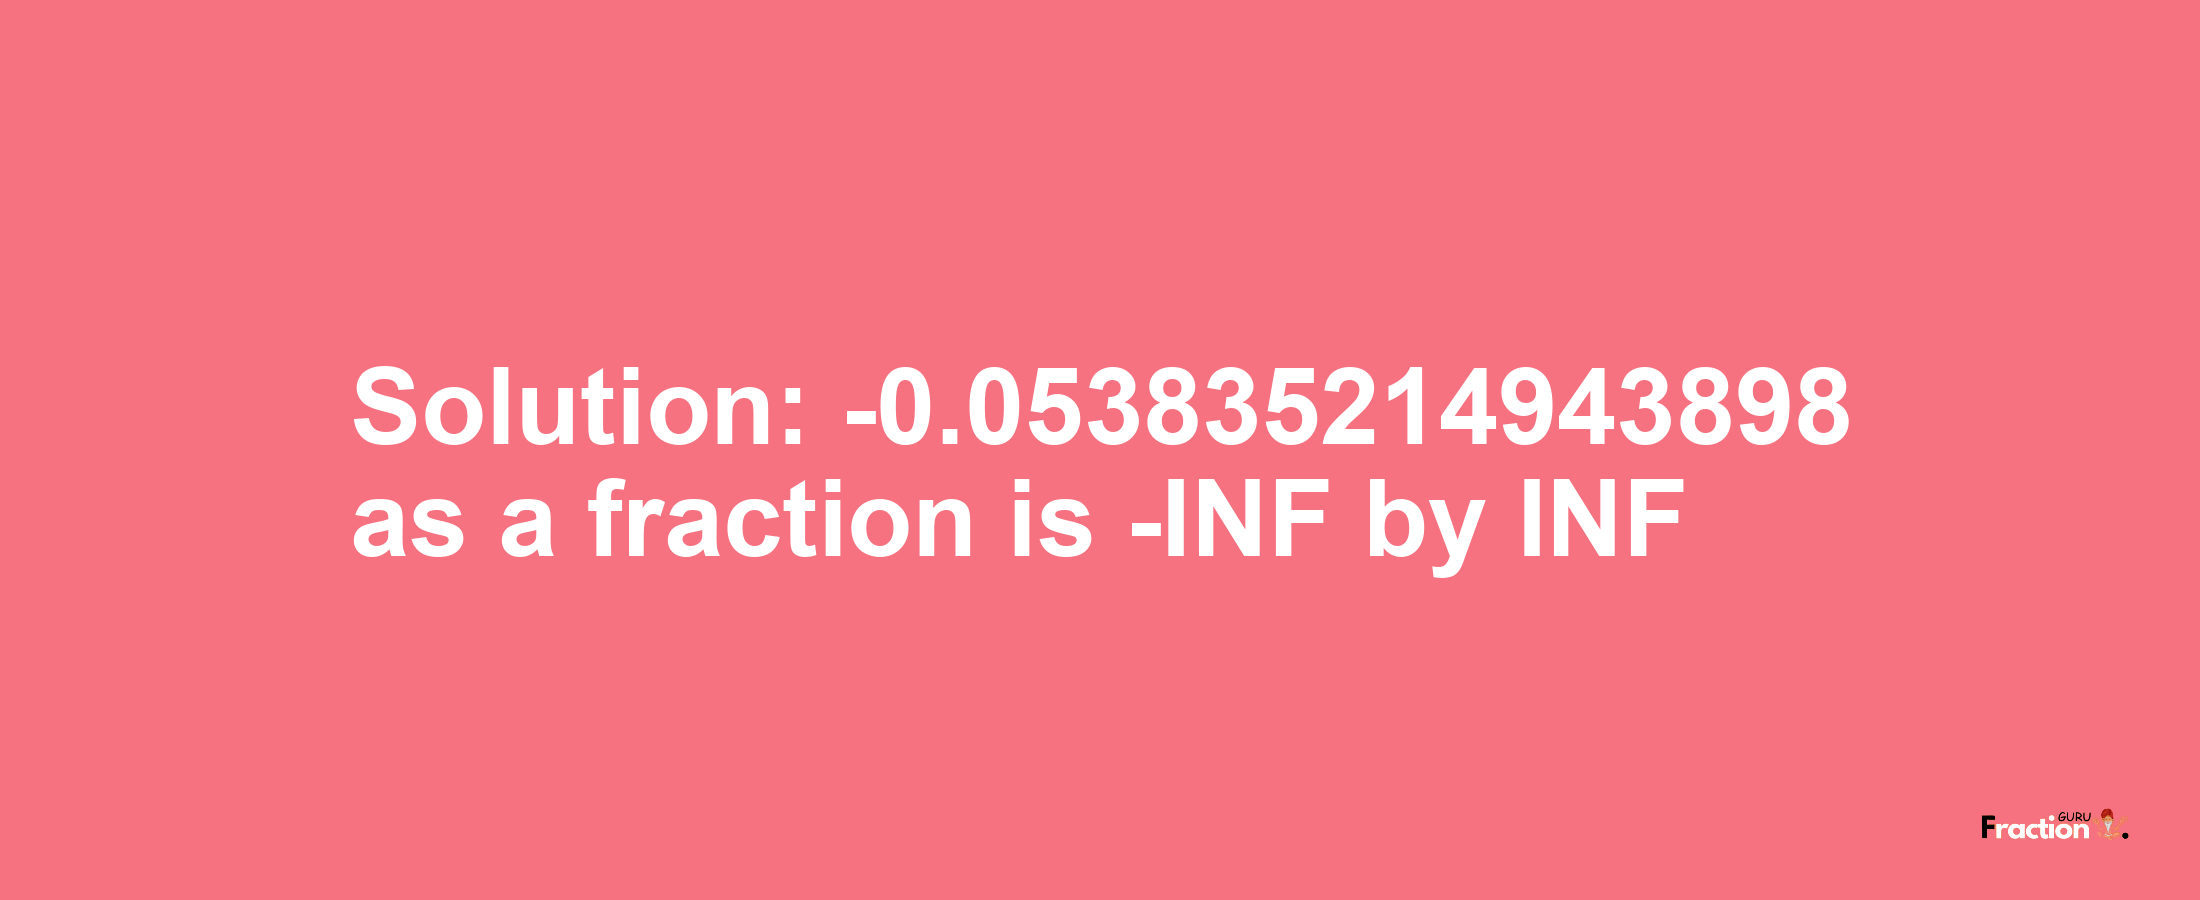 Solution:-0.053835214943898 as a fraction is -INF/INF